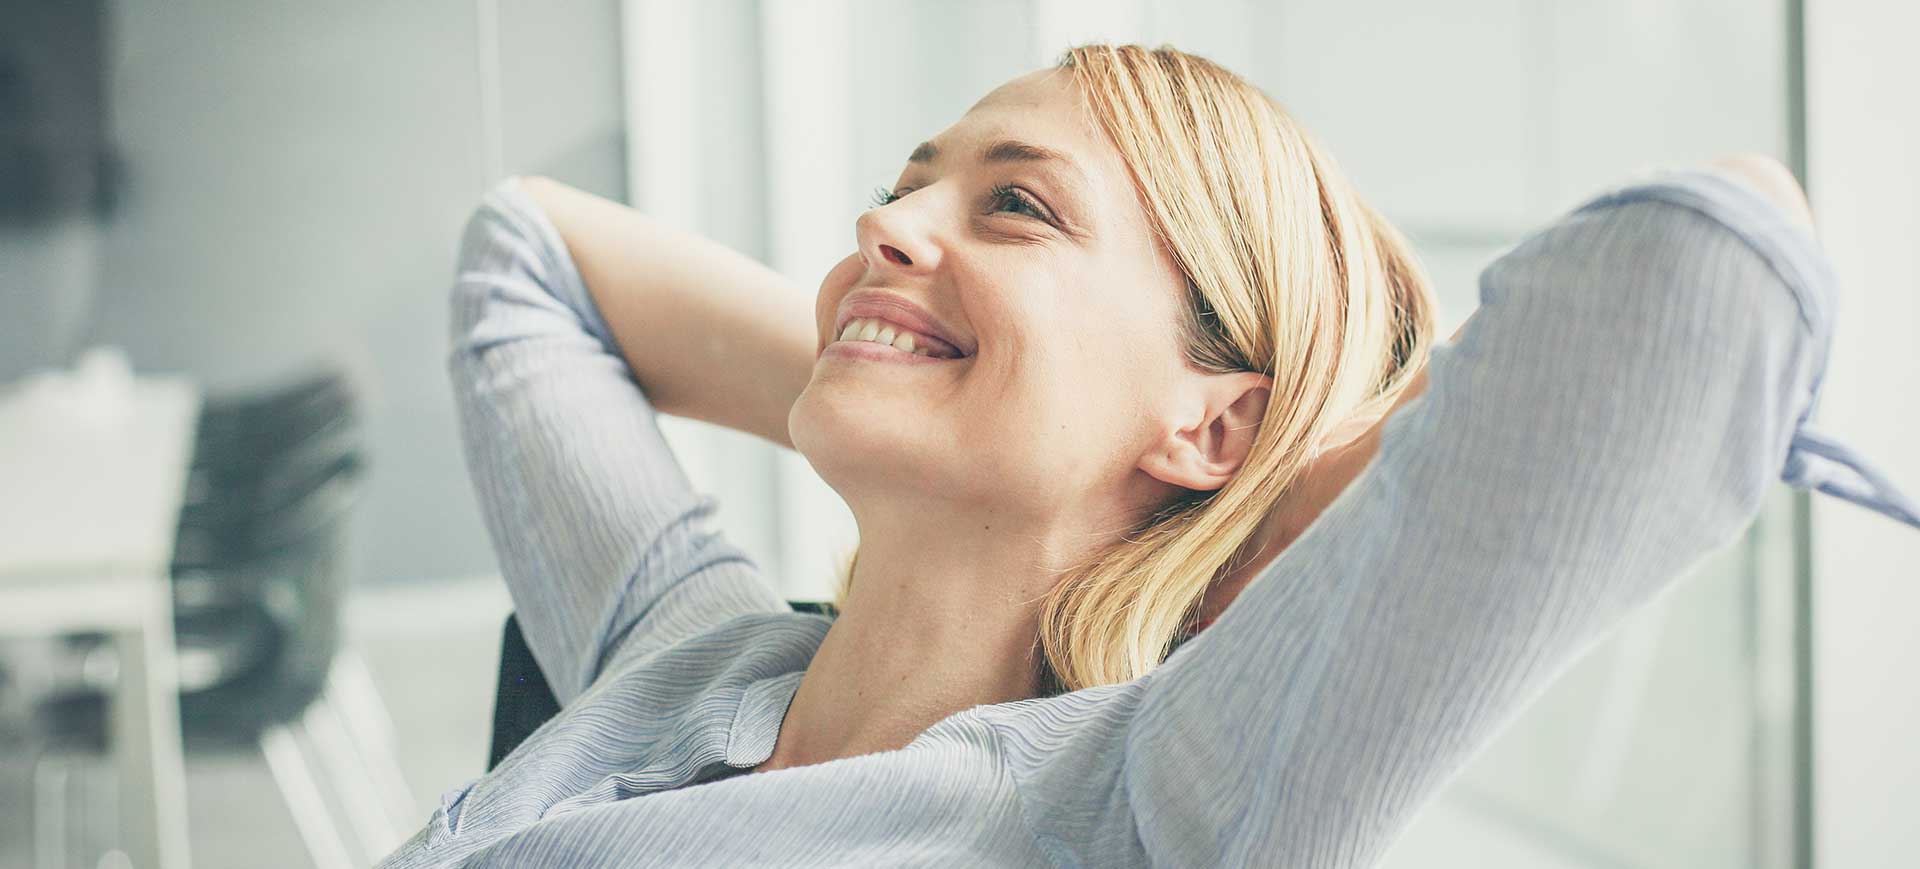 RELAXED WOMAN IN HYPNOTHERAPY SESSION